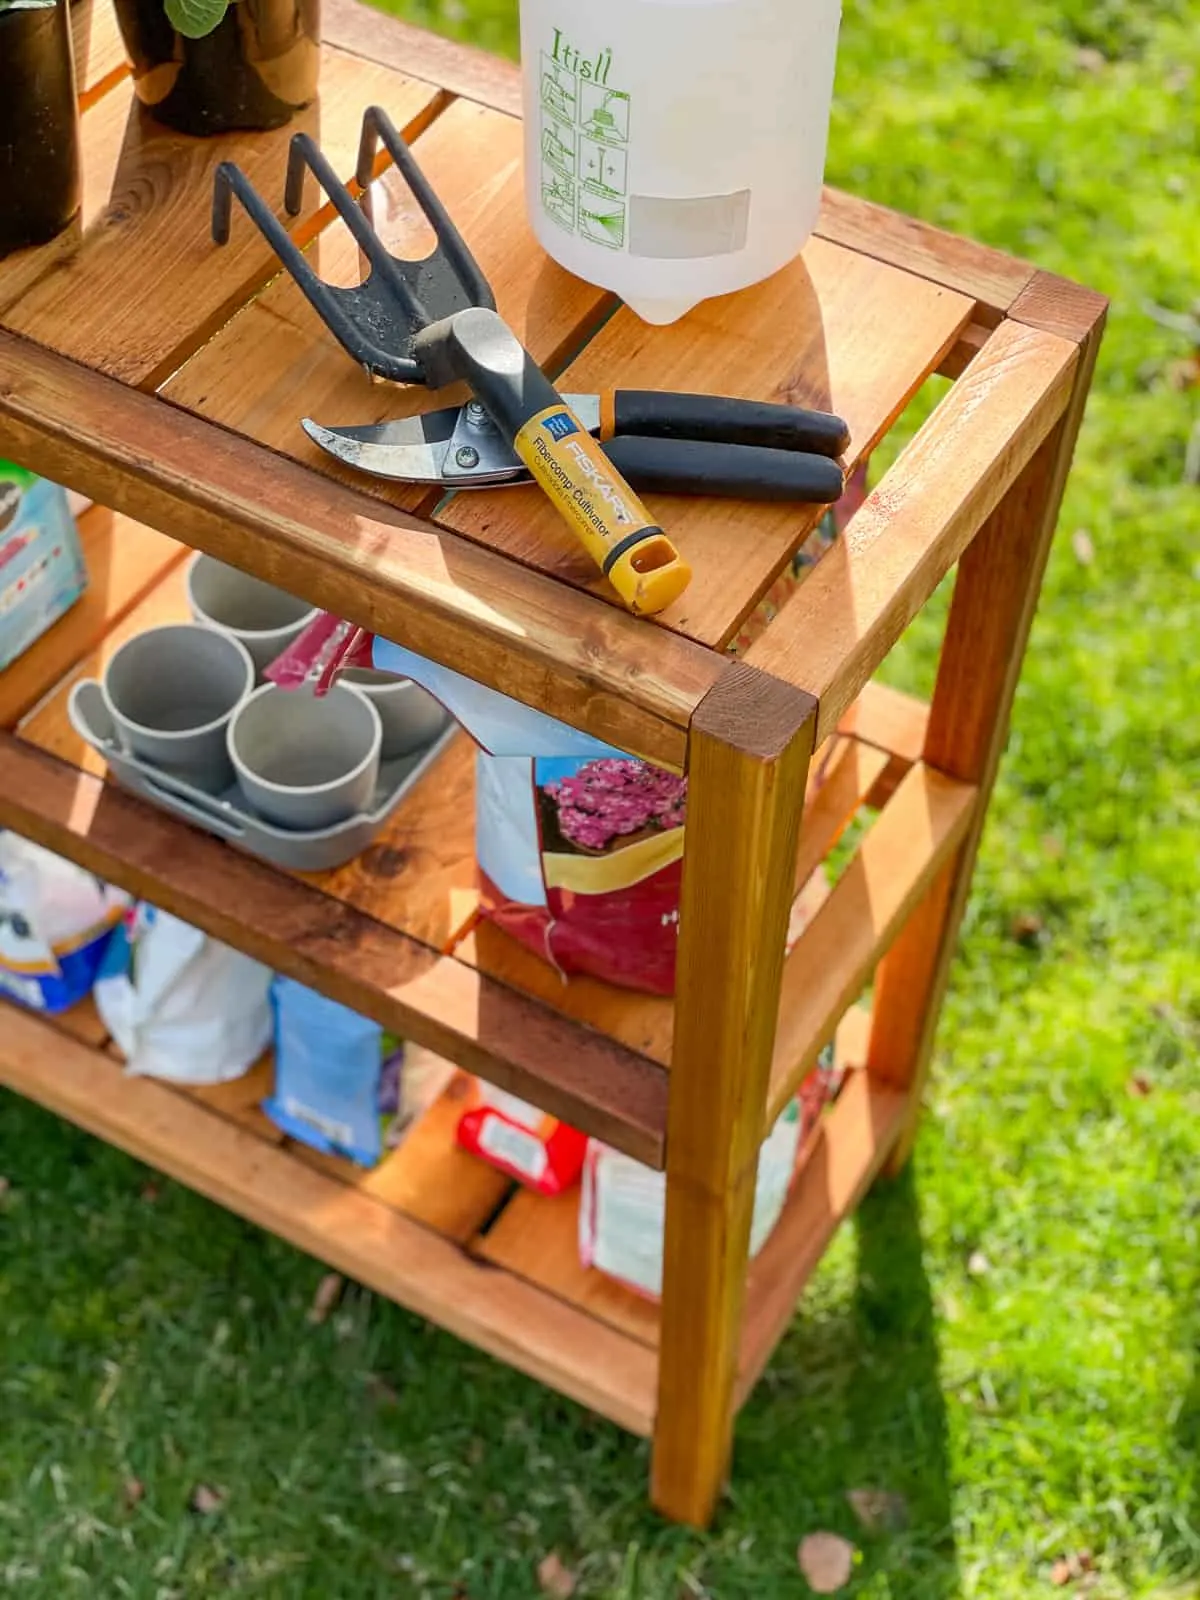 pruners and gardening tools on top shelf of DIY outdoor shelves, with pots and bags of fertilizer below